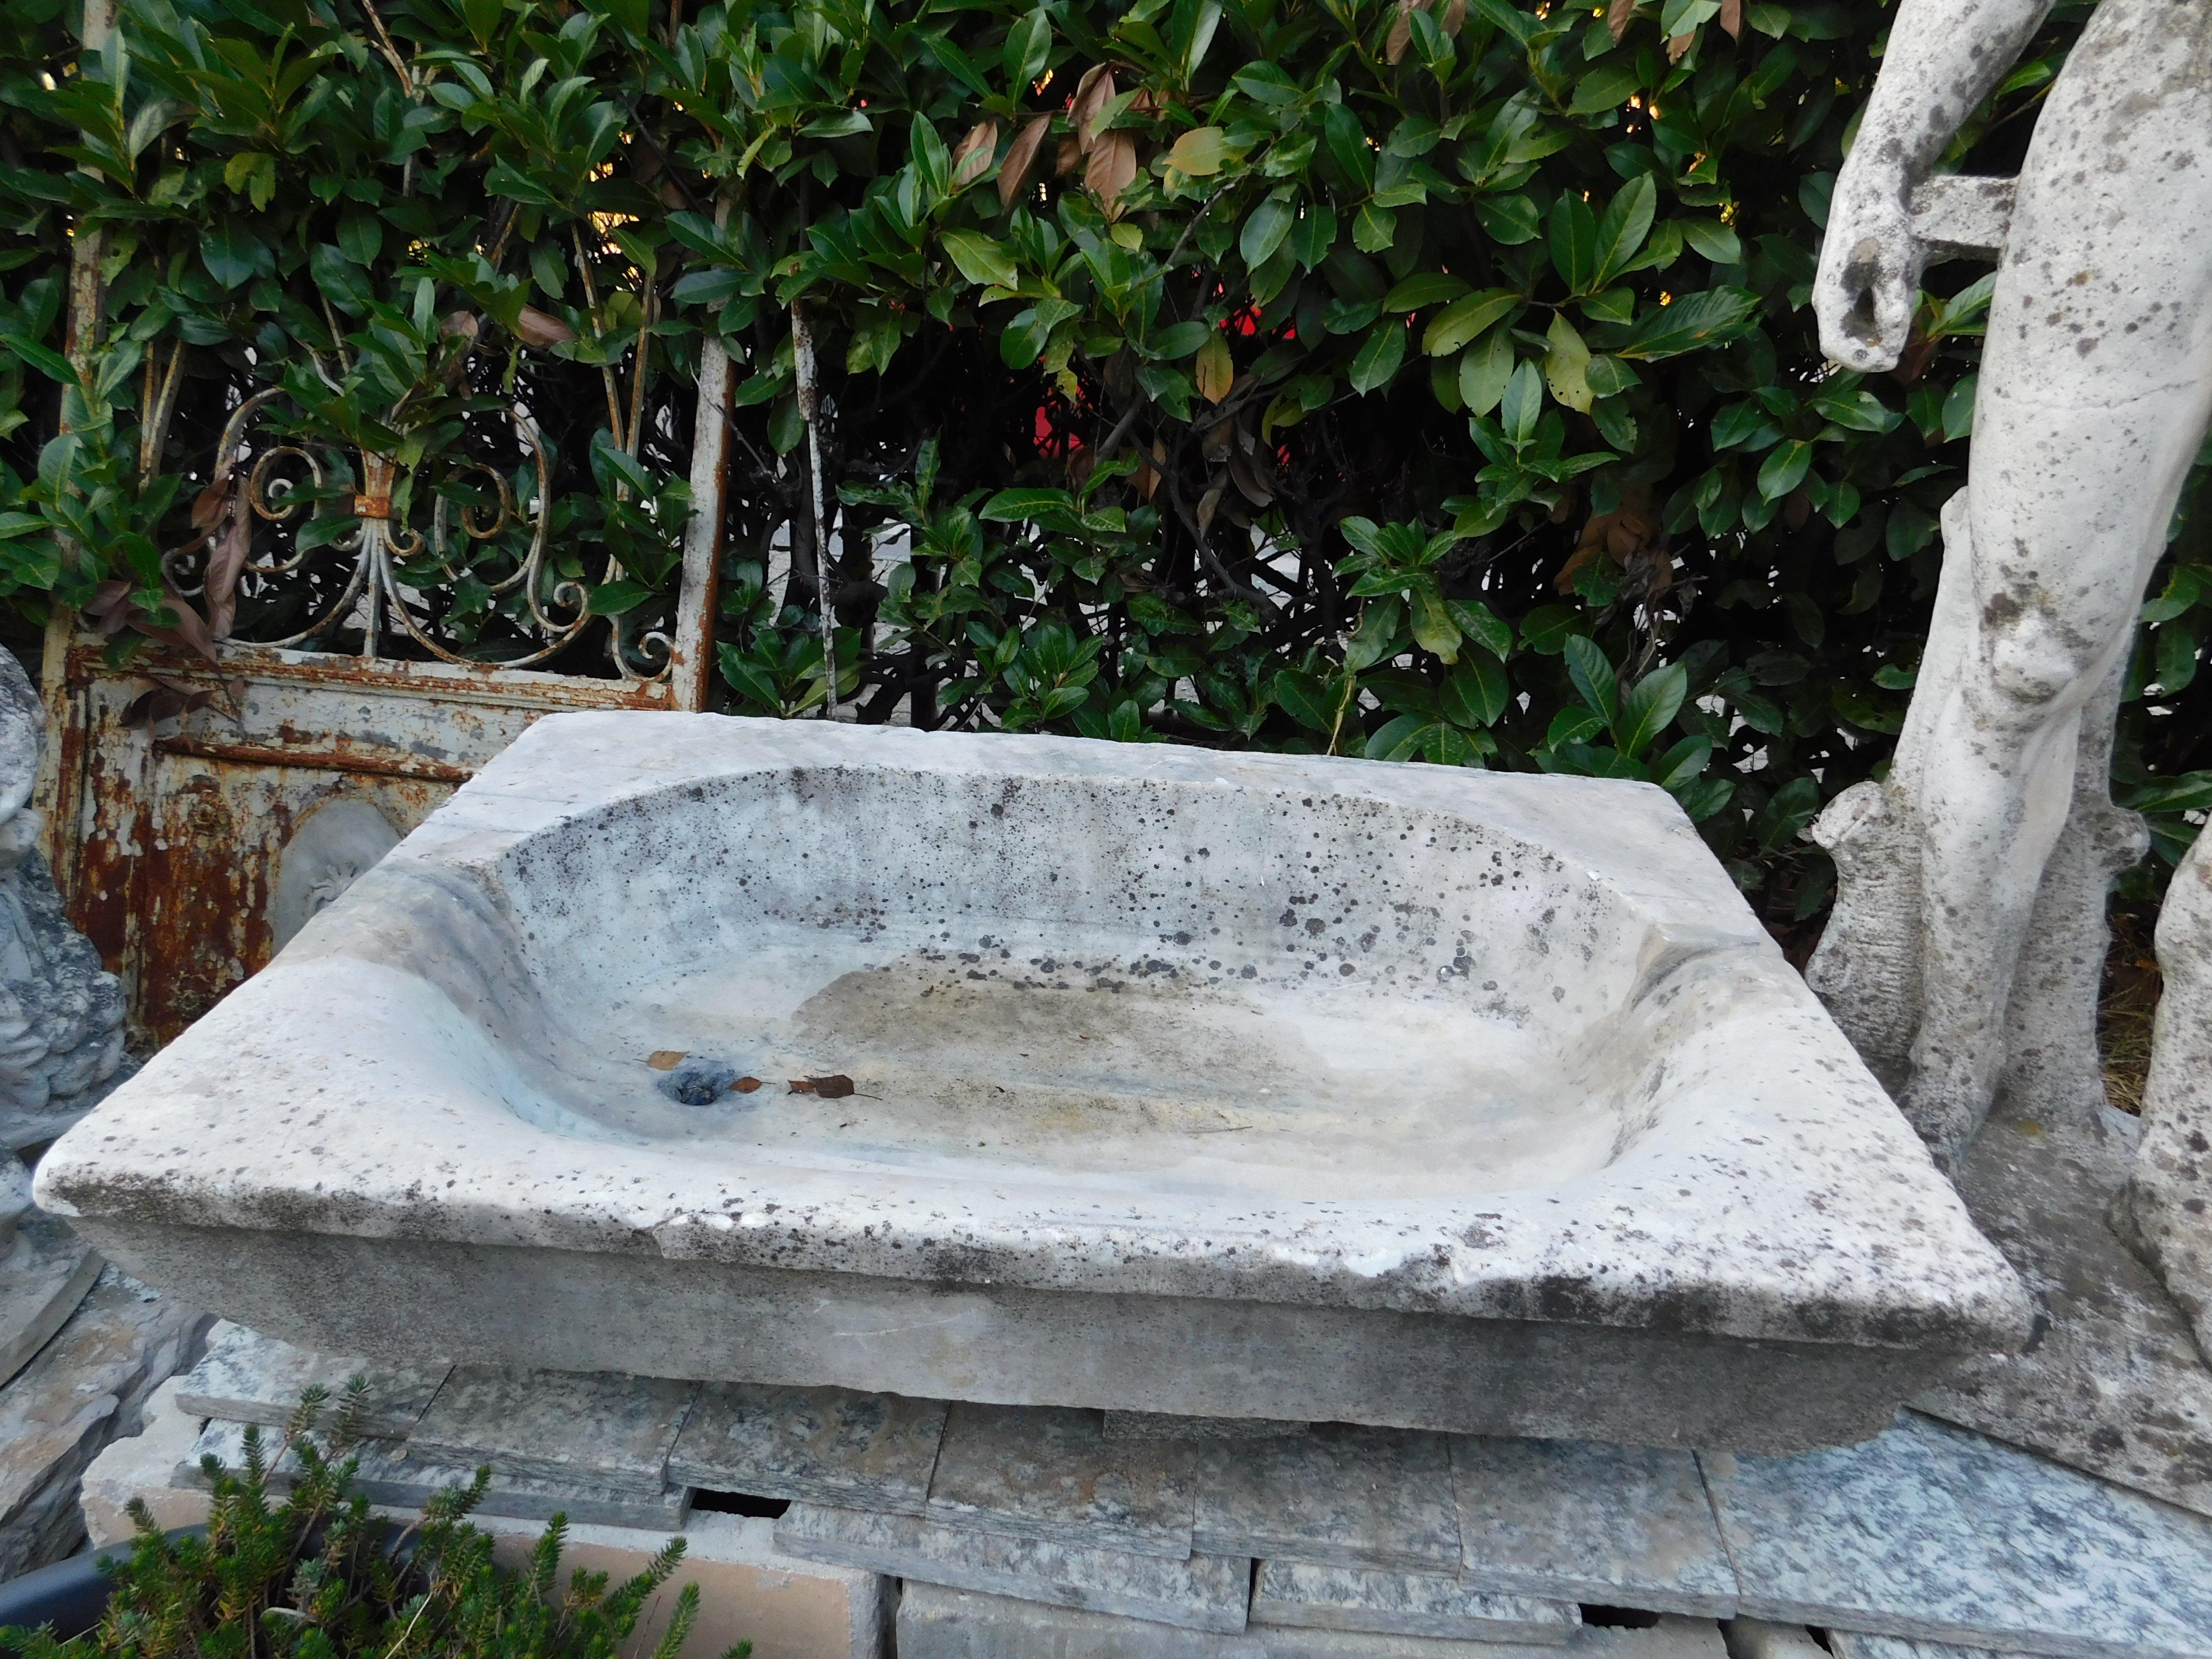 vintage white marble sink, with drain hole, hand carved in white marble block, from the 1900s in Italy.
Also ideal for interiors, bathrooms, gardens, kitchens, etc... leave room for imagination. measures cm w 100x H 25 x D 68.